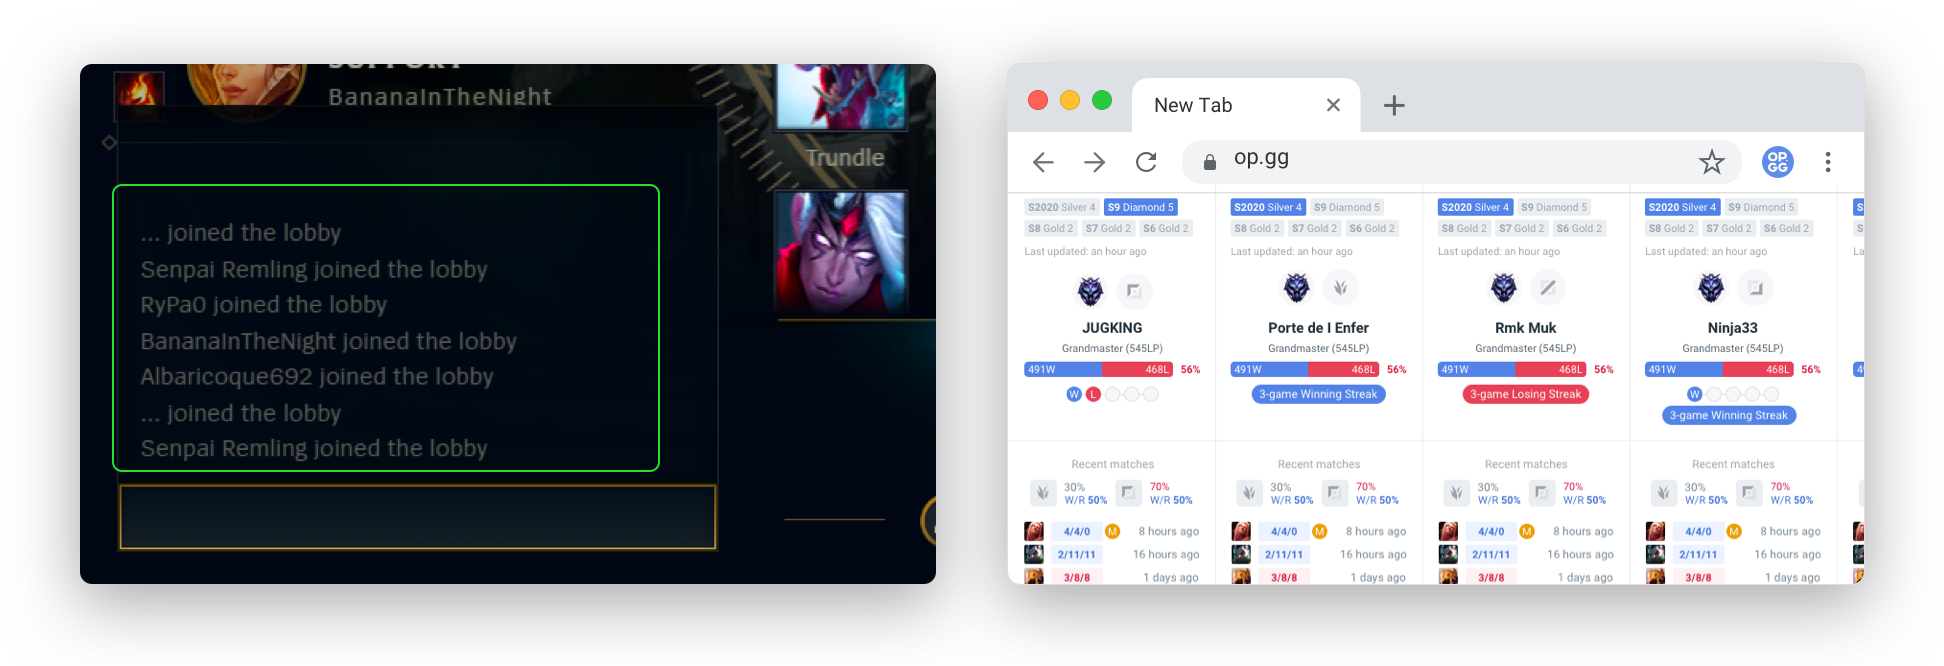 How to copy paste in league of legends chat